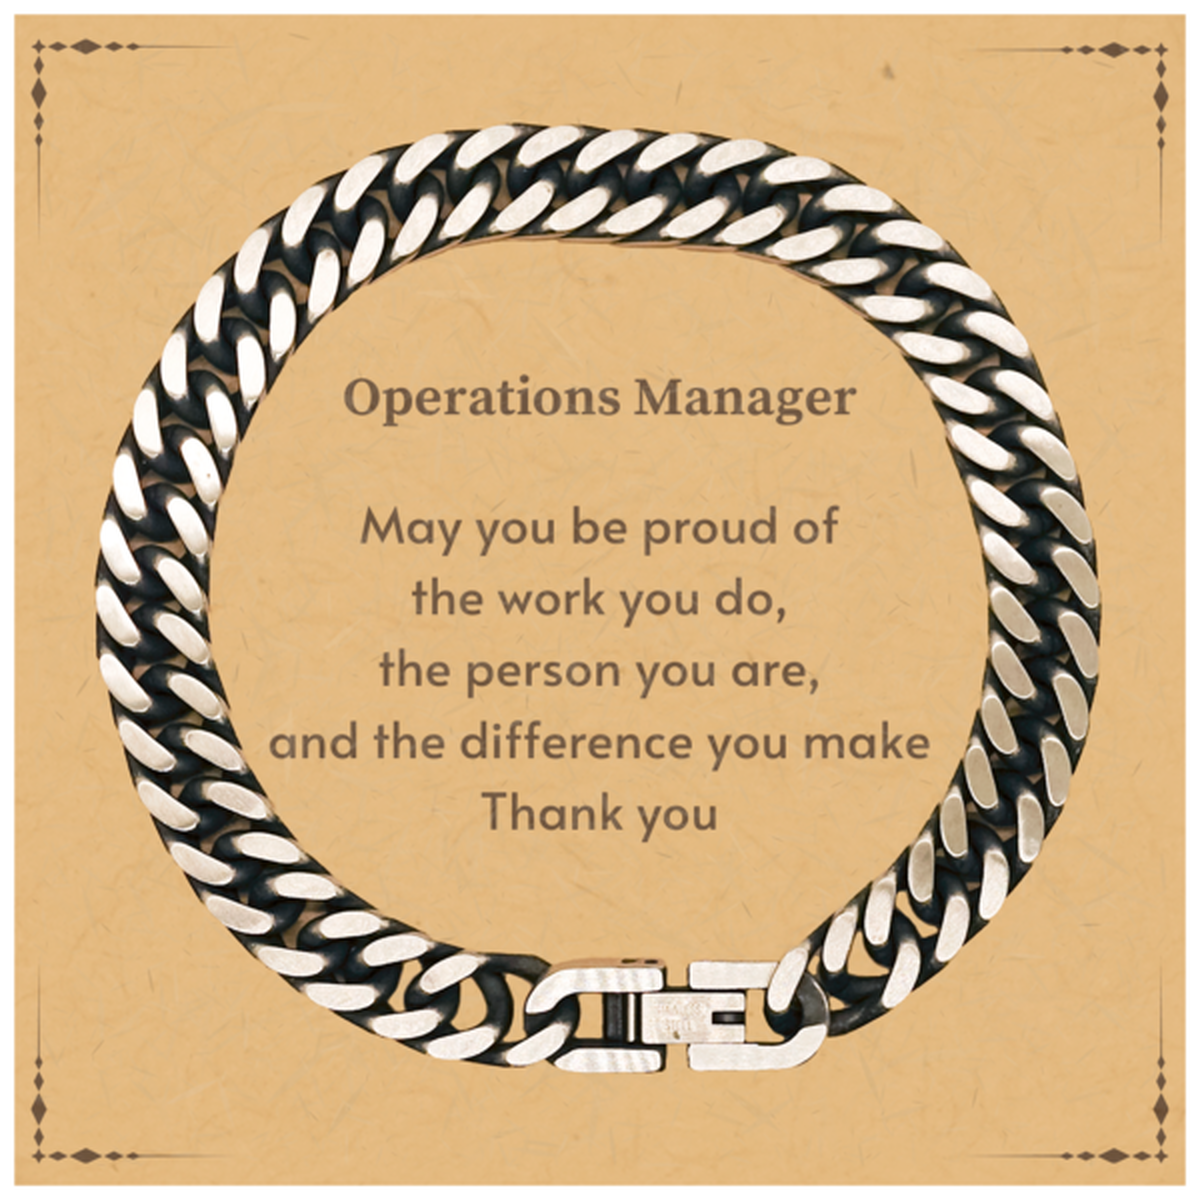 Heartwarming Cuban Link Chain Bracelet Retirement Coworkers Gifts for Operations Manager, Operations Manager May You be proud of the work you do, the person you are Gifts for Boss Men Women Friends